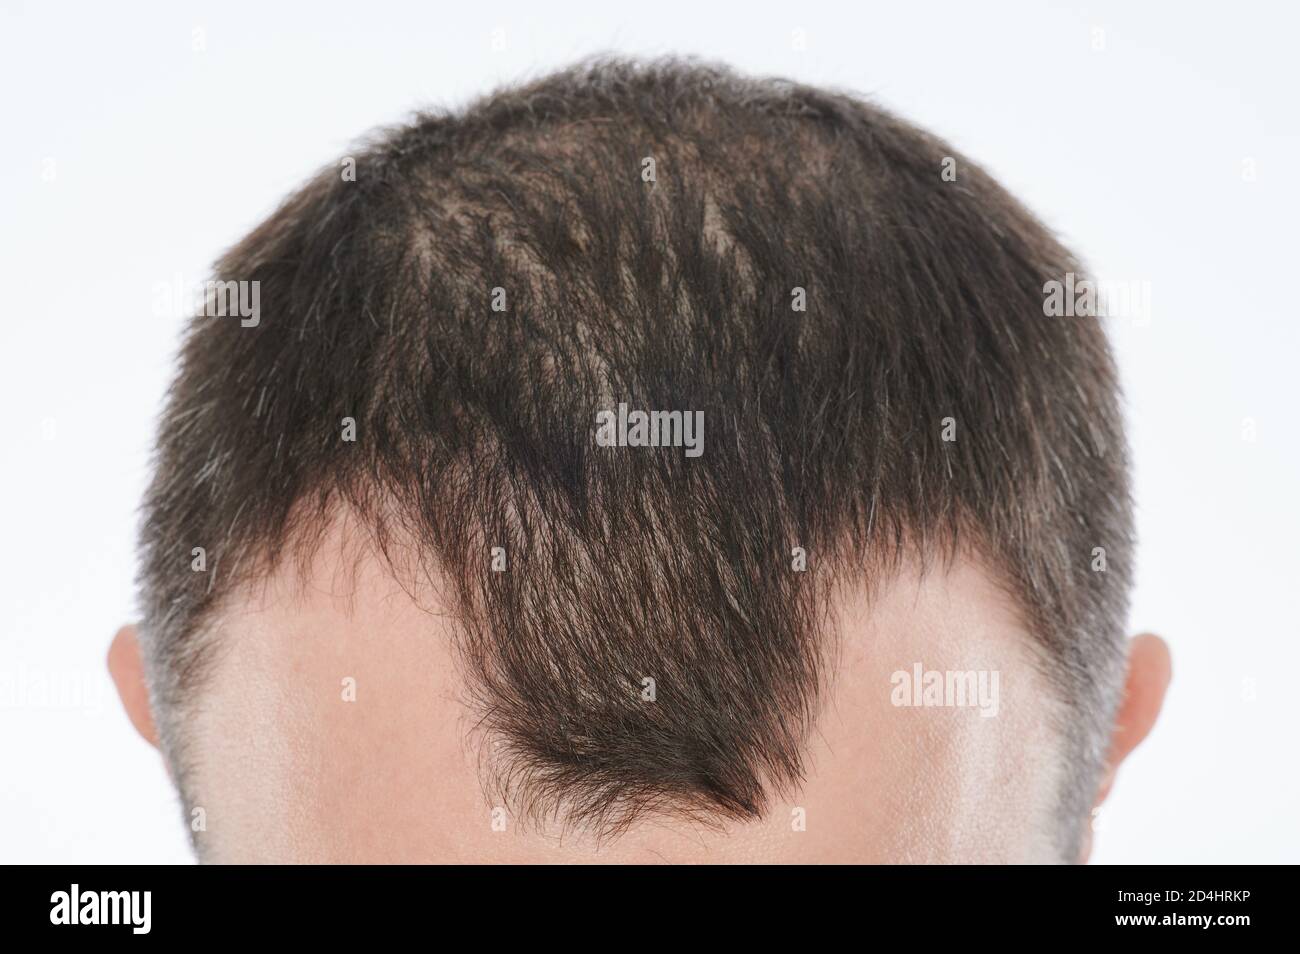 Man losing hair on head close up isolated on white background Stock Photo